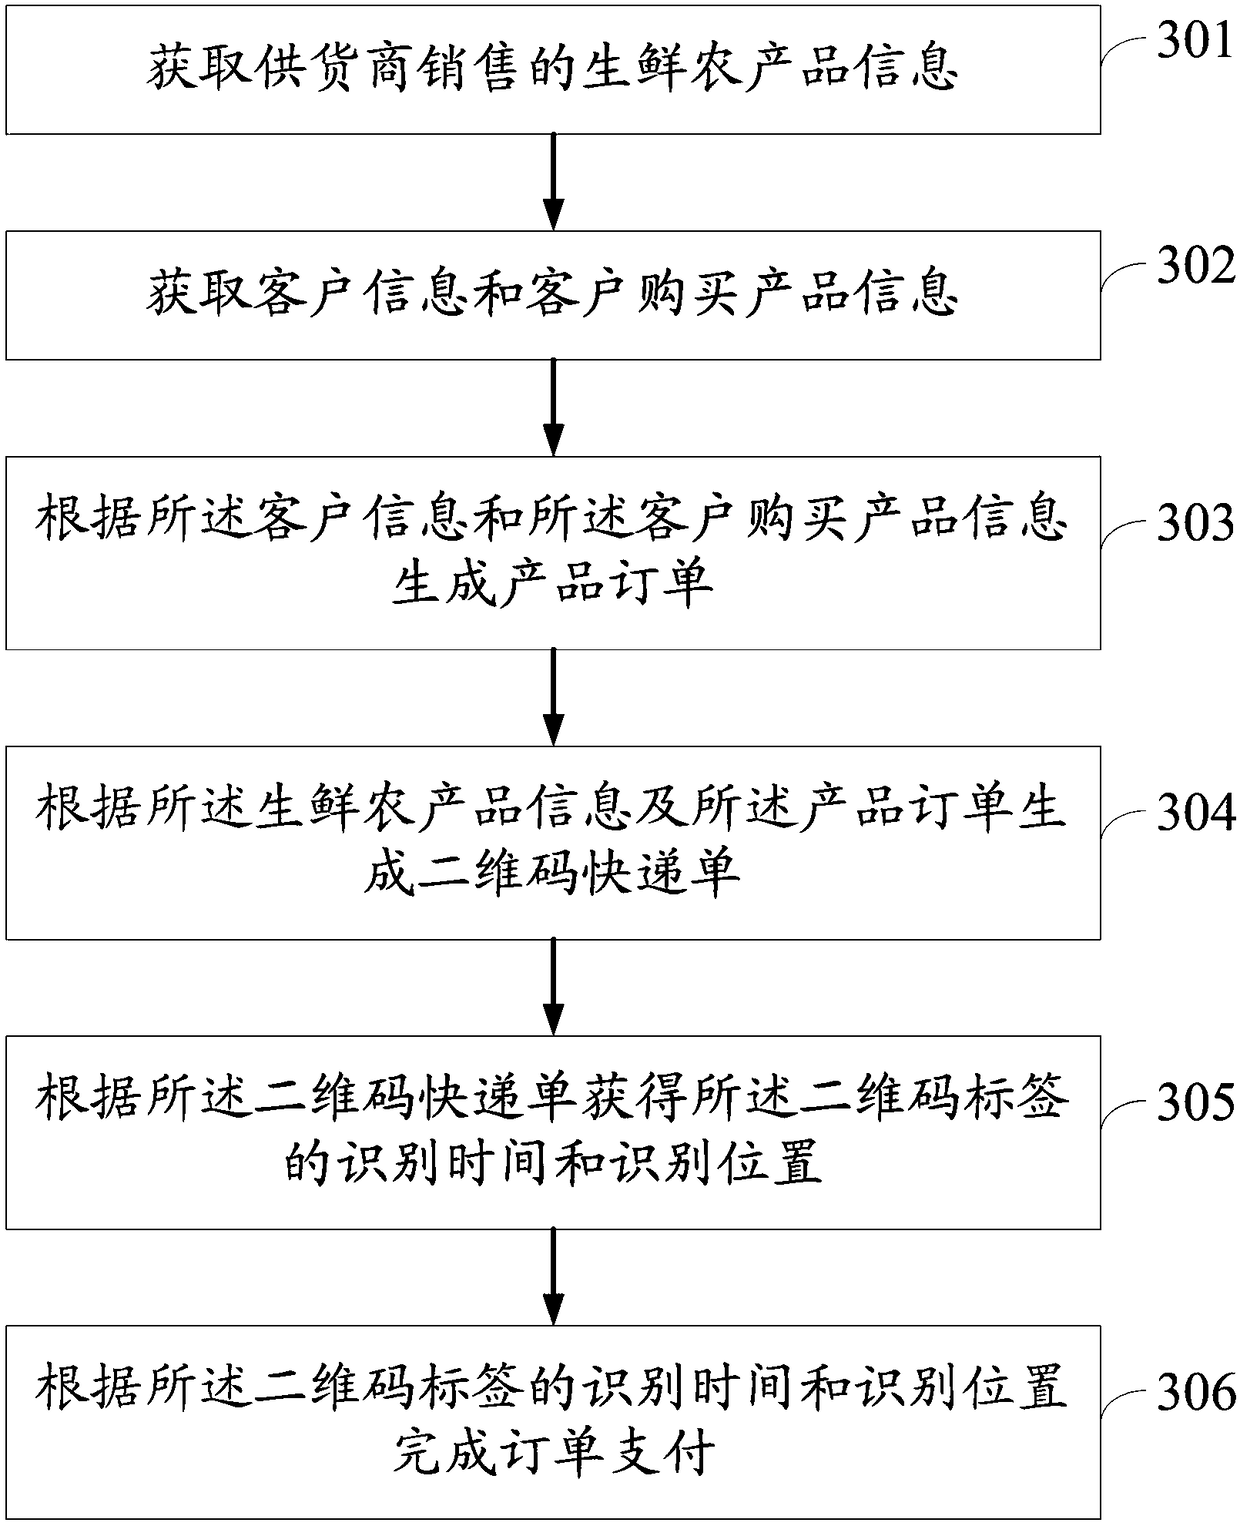 Two-dimensional code express waybill, and fresh agricultural product circulation tracking and management system and method